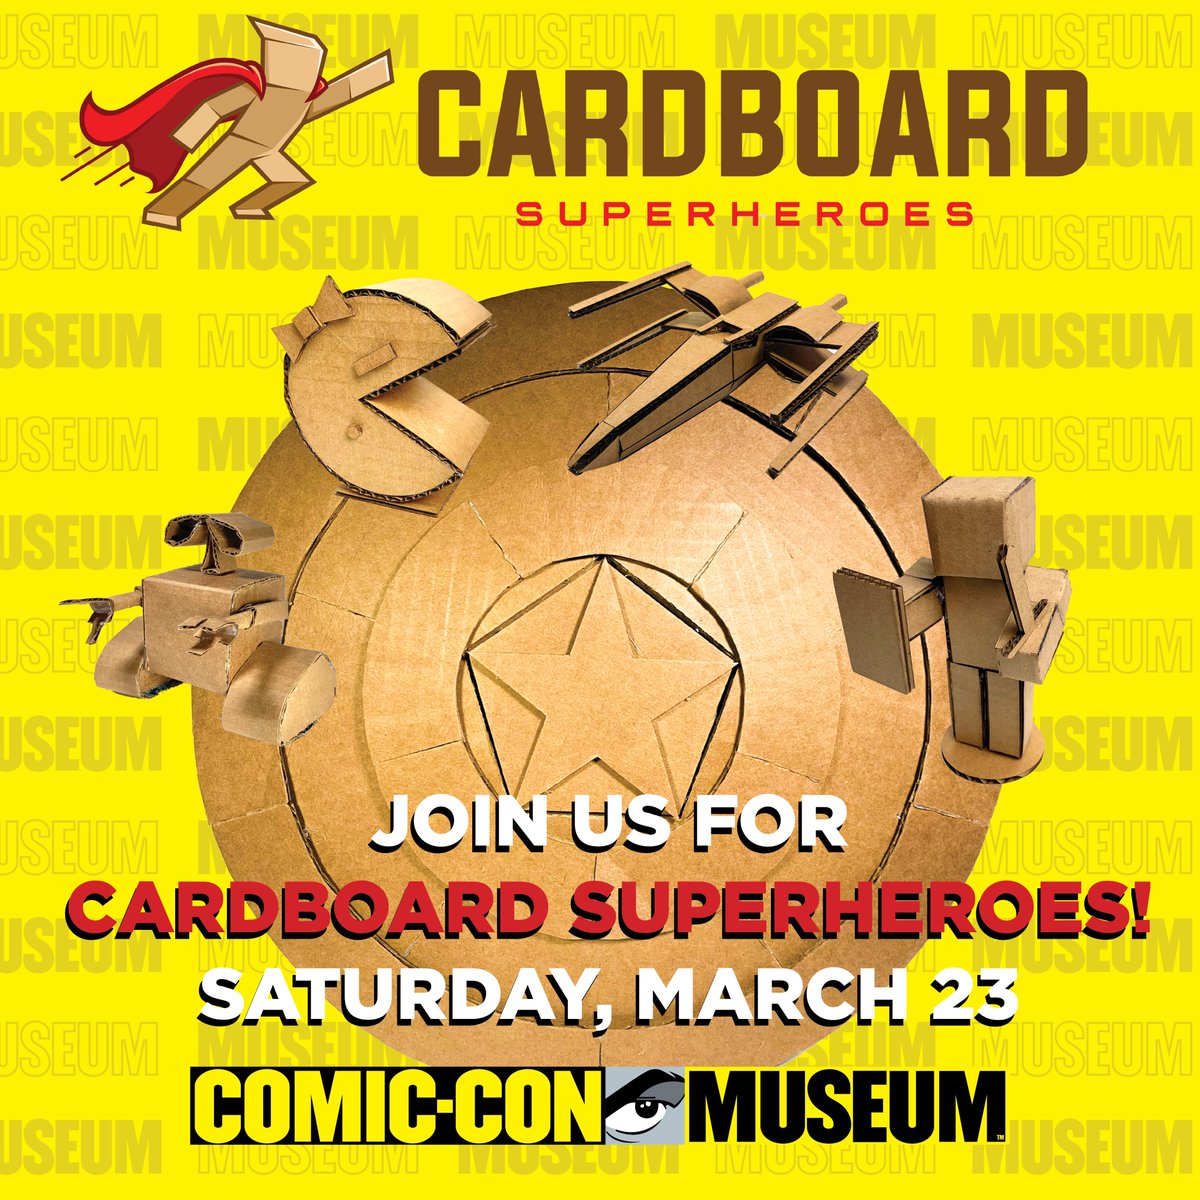 It’s time to unleash your inner superhero! 🦸 Join us at the Museum on Saturday, March 23, with @CardboardSuperH to build some of your favorite characters out of recycled cardboard. Workshops are free with museum admission. Reserve your tickets at comic-conmuseum.org.